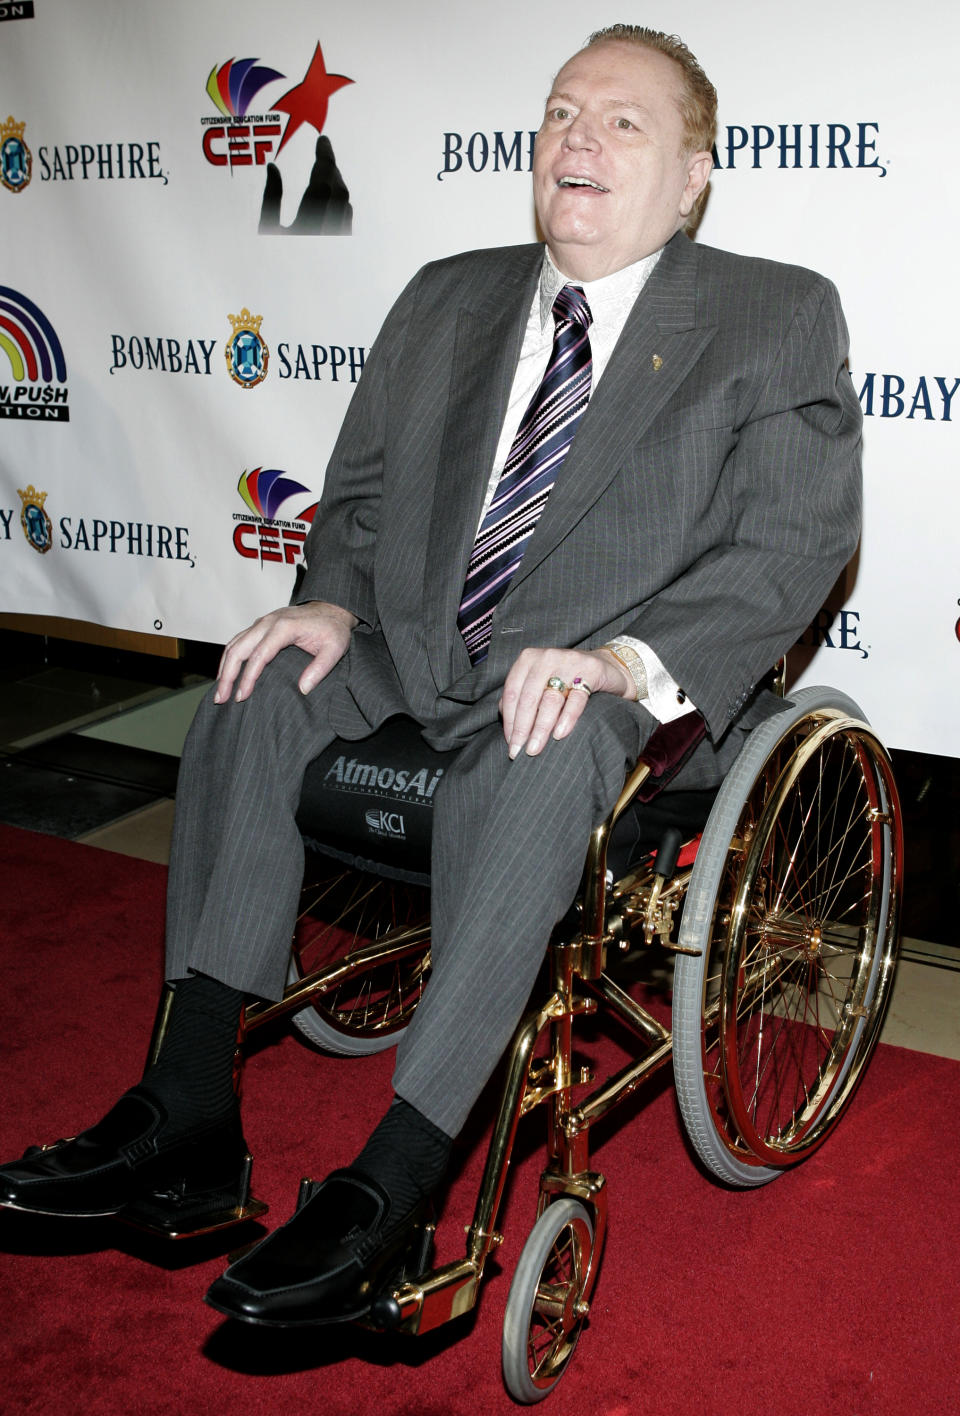 FILE - Hustler magazine founder Larry Flynt poses for photographers on the red carpet during the RainbowPUSH Coalition 10th annual awards dinner celebrating Jesse Jackson's 66th birthday, on Nov. 8, 2007, in Los Angeles. Flynt, who turned "Hustler" magazine into an adult entertainment empire while championing First Amendment rights, has died at age 78. His nephew, Jimmy Flynt Jr., told The Associated Press that Flynt died Wednesday, Feb. 10, 2021, of heart failure at his Hollywood Hills home in Los Angeles. (AP Photo/Danny Moloshok, File)